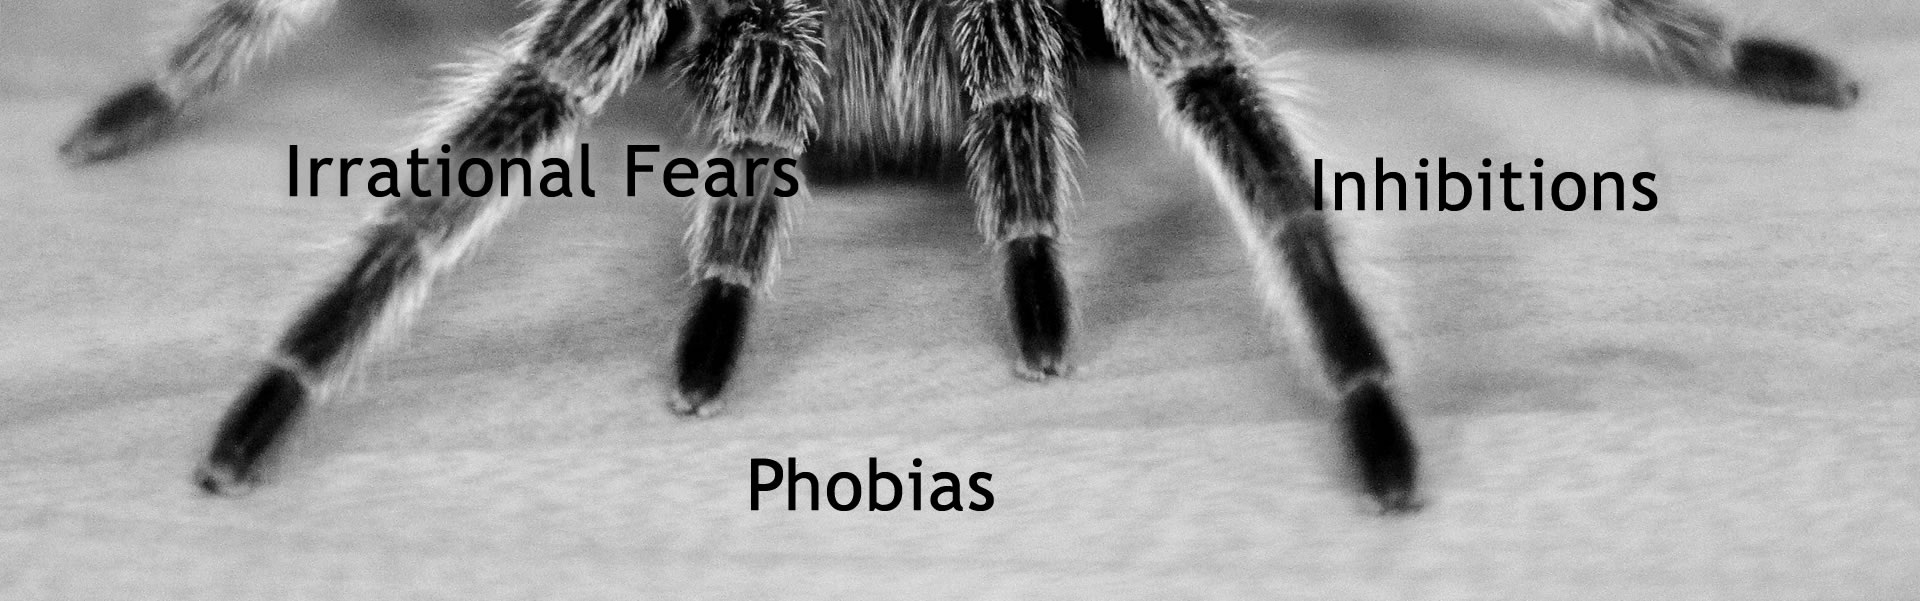 fears, inhibitions, phobias